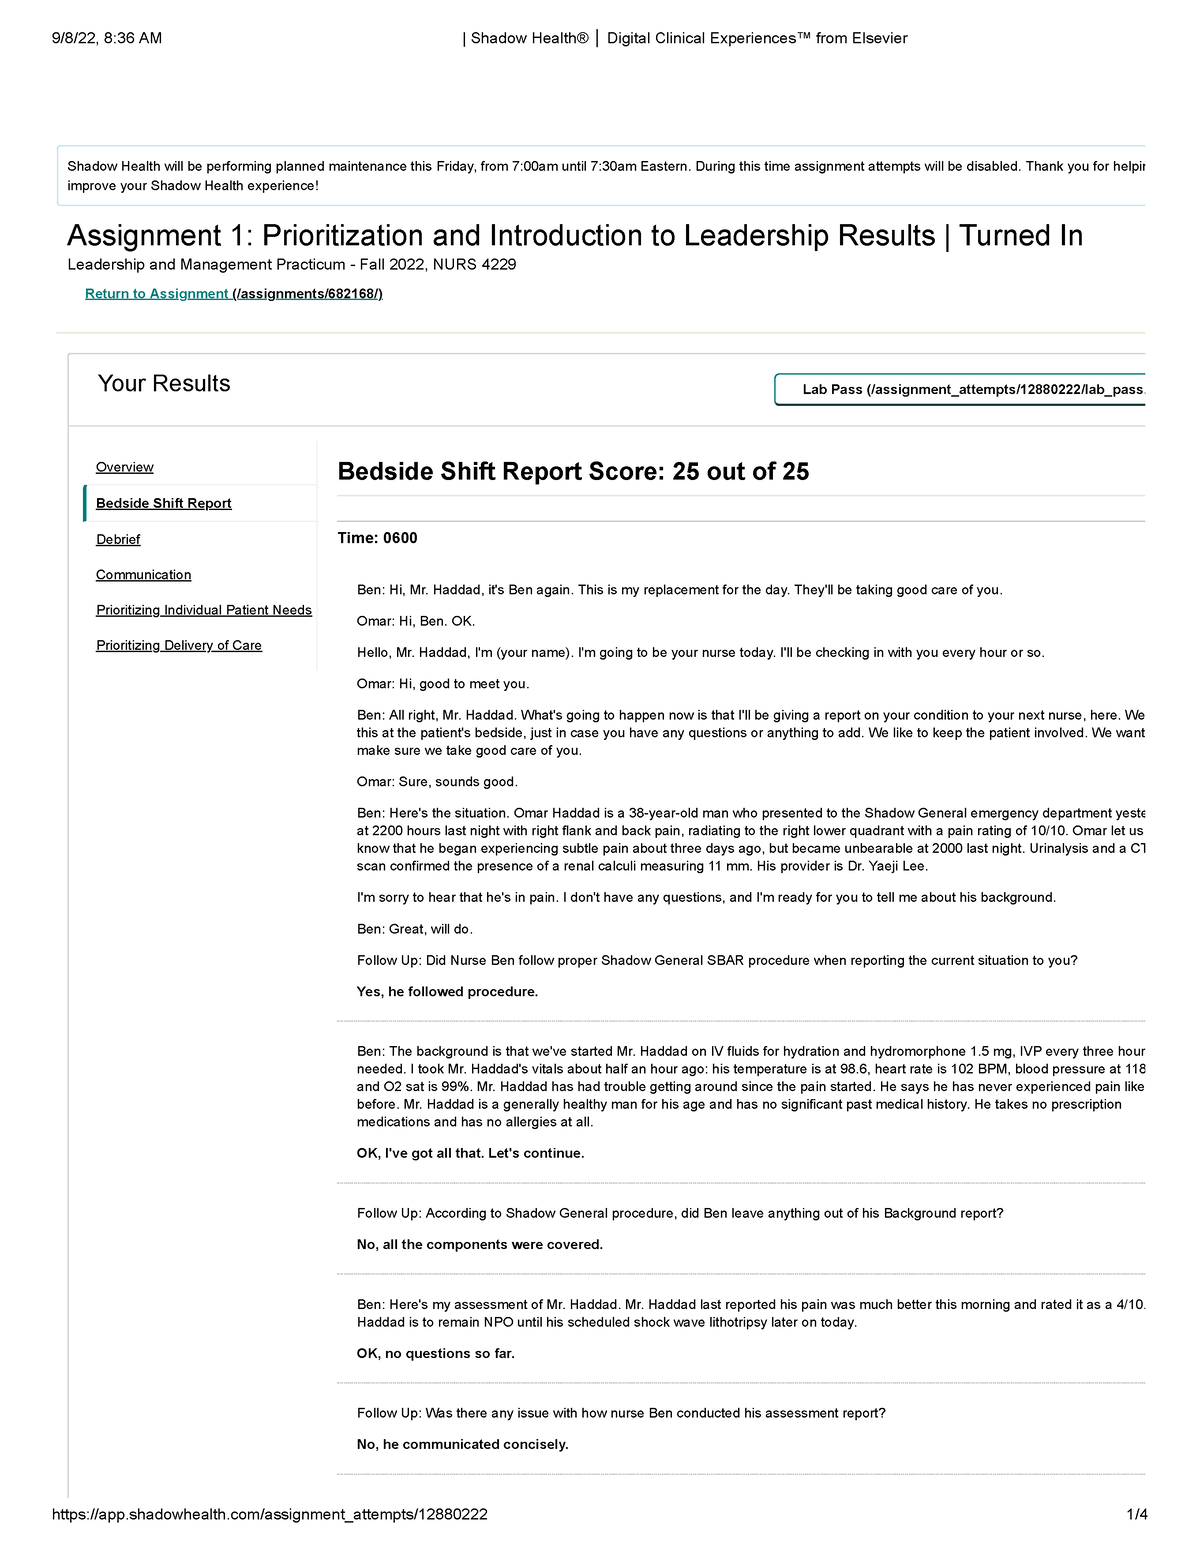 shadow health leadership assignment 1 quizlet